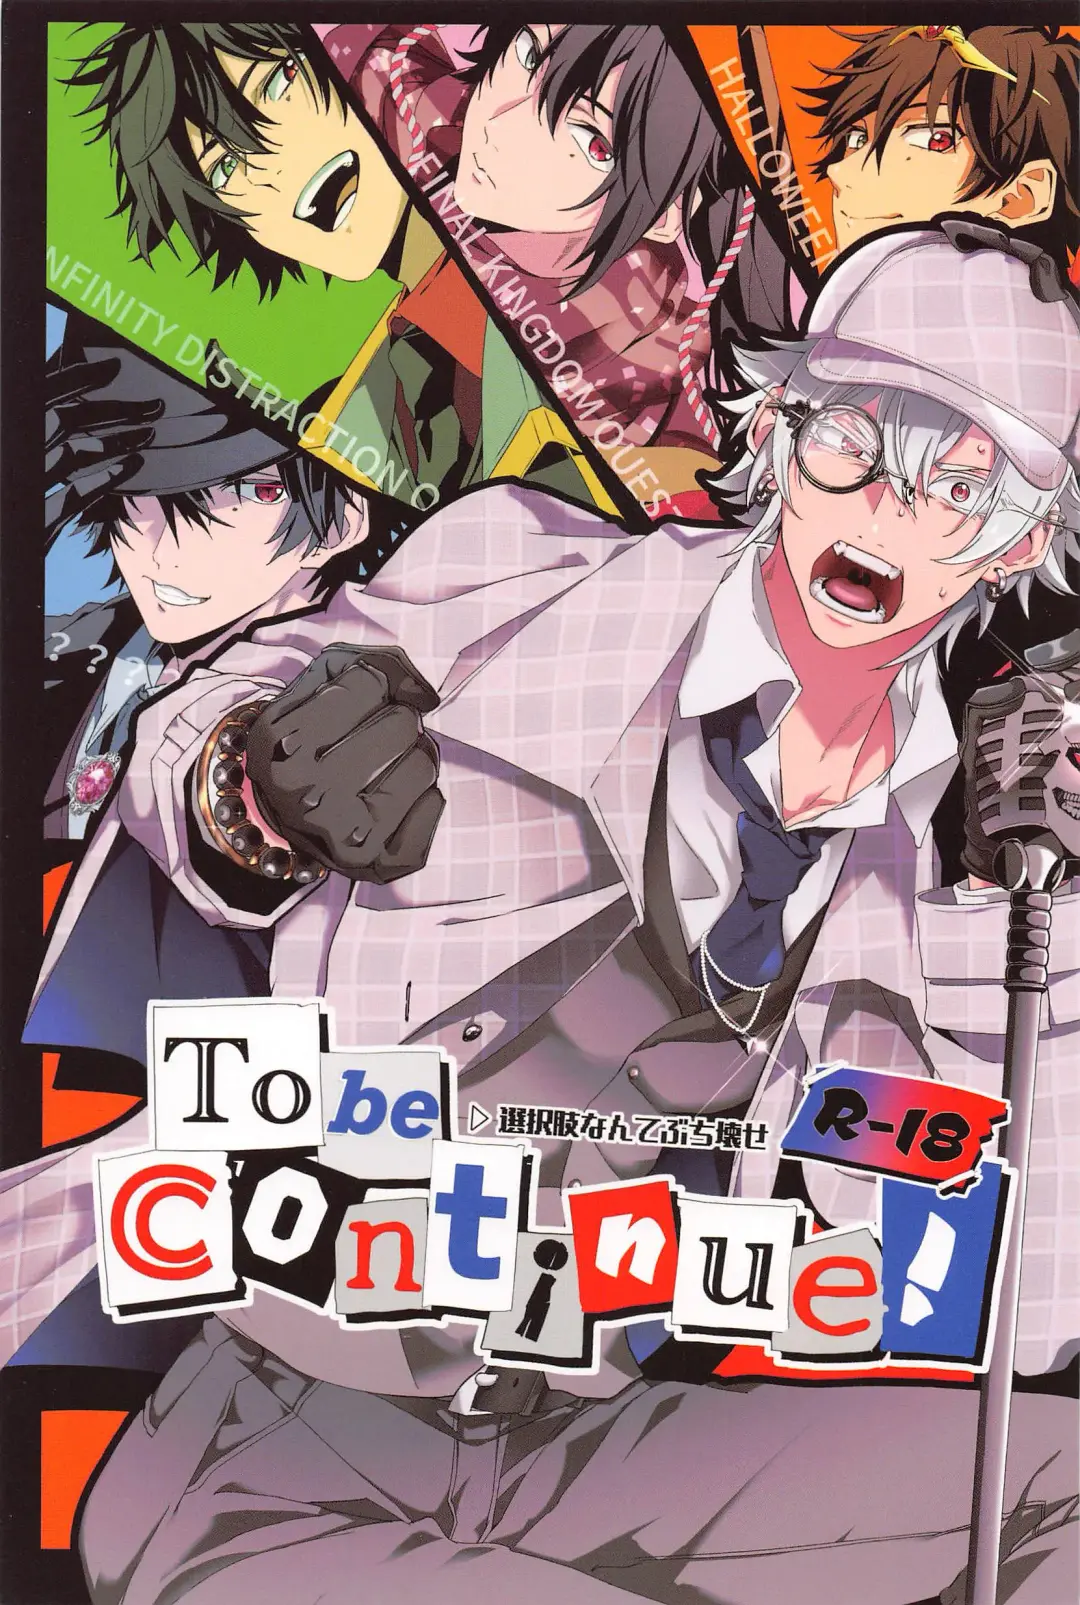 Read To be continued! - Fhentai.net